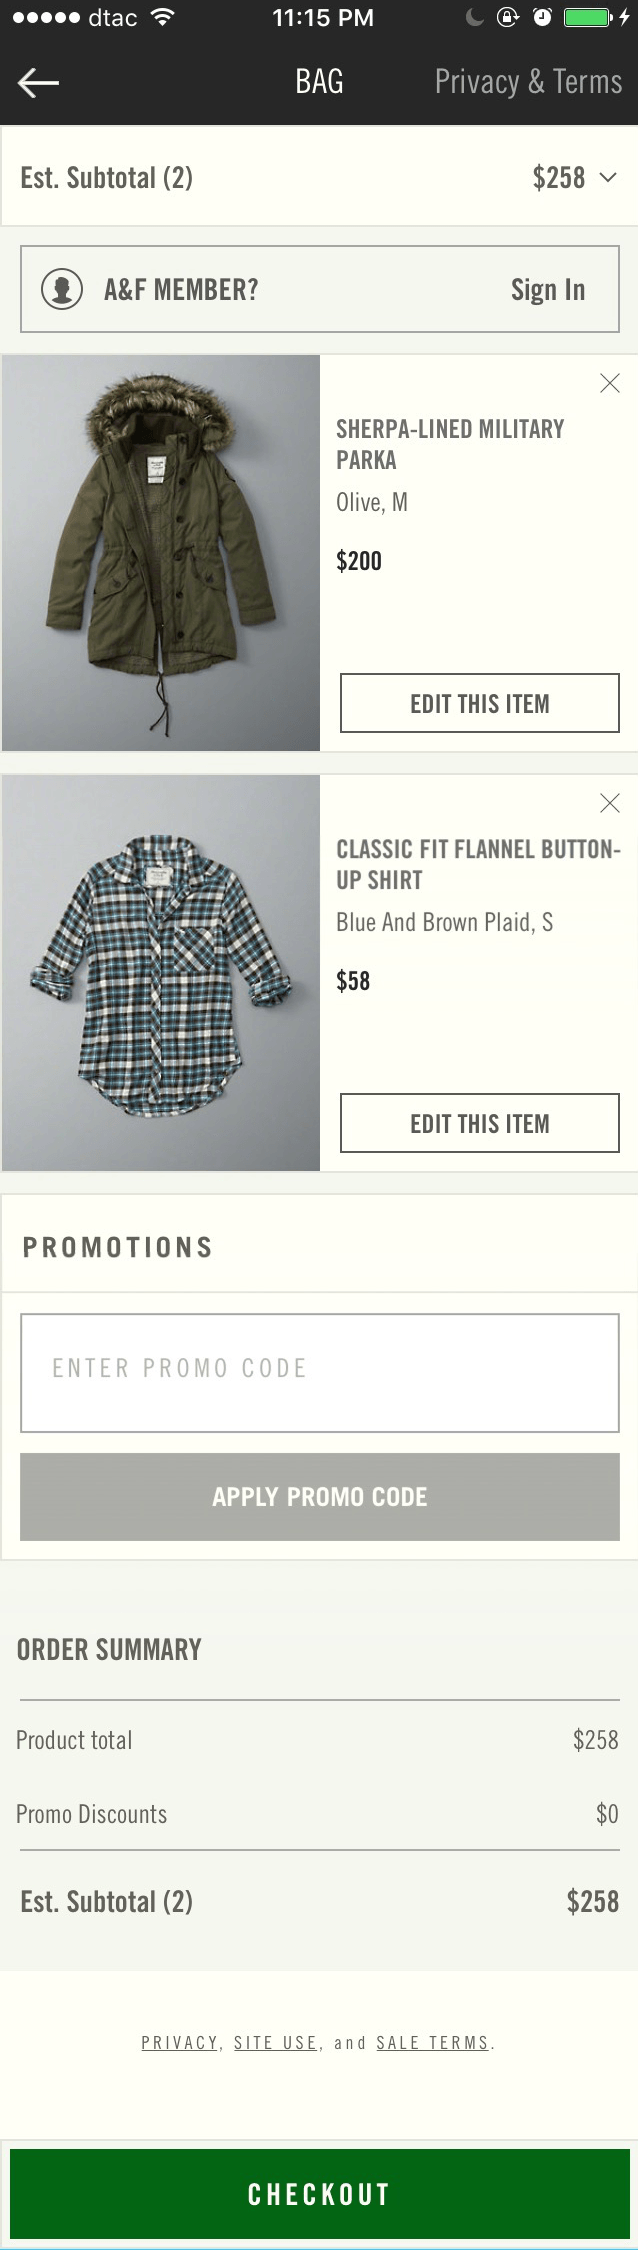 Abercrombie & Fitch mobile shopping cart design